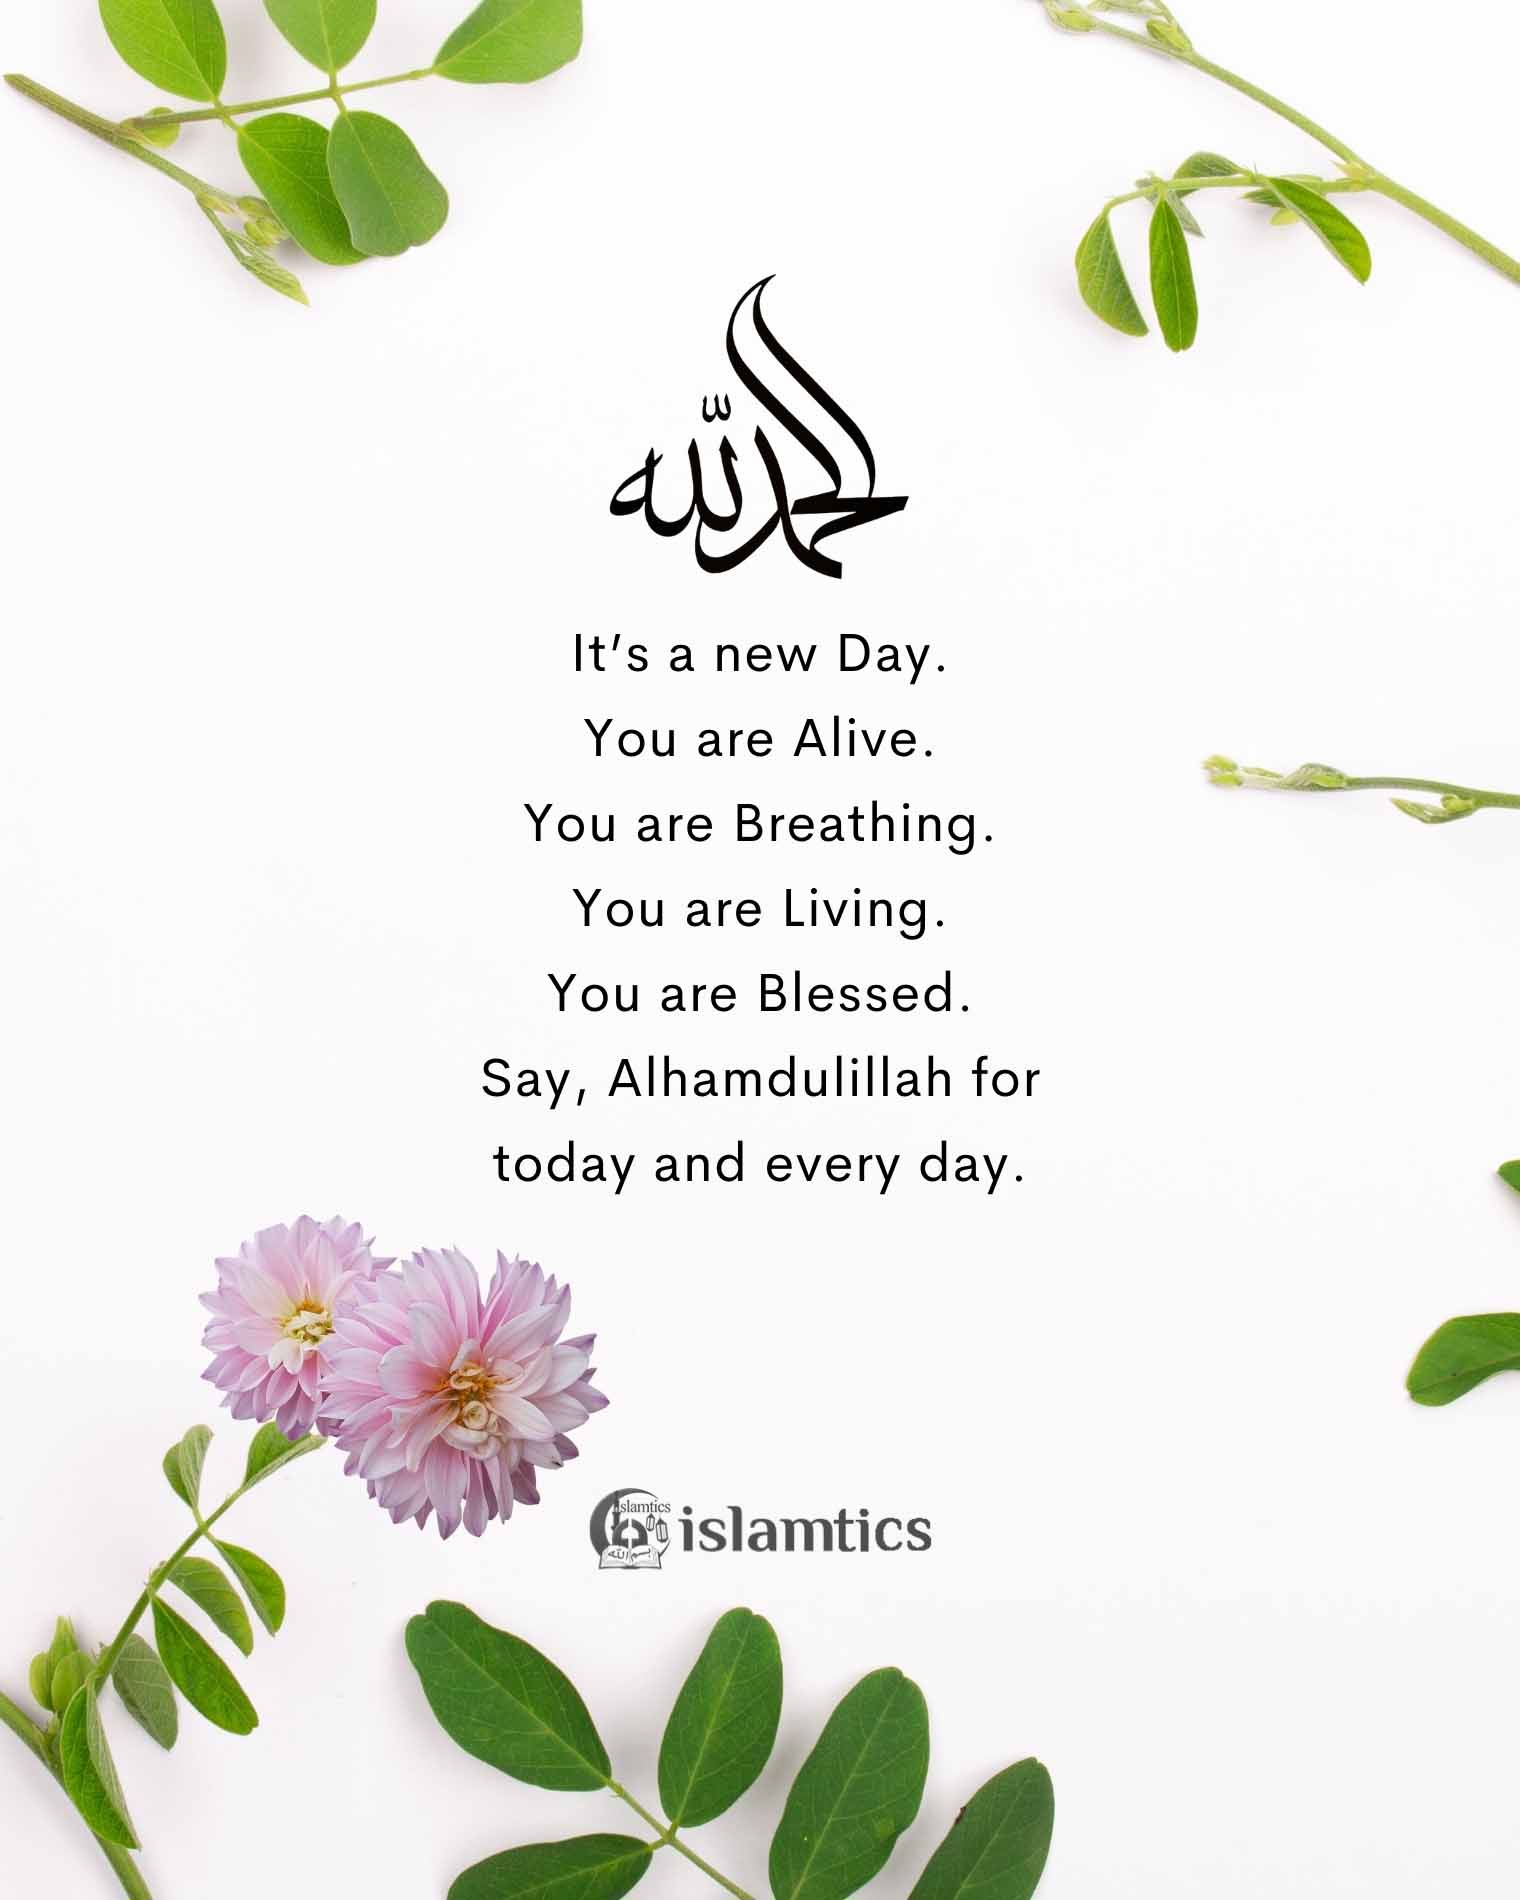  It’s a new Day. Say, Alhamdulillah for today and every day.